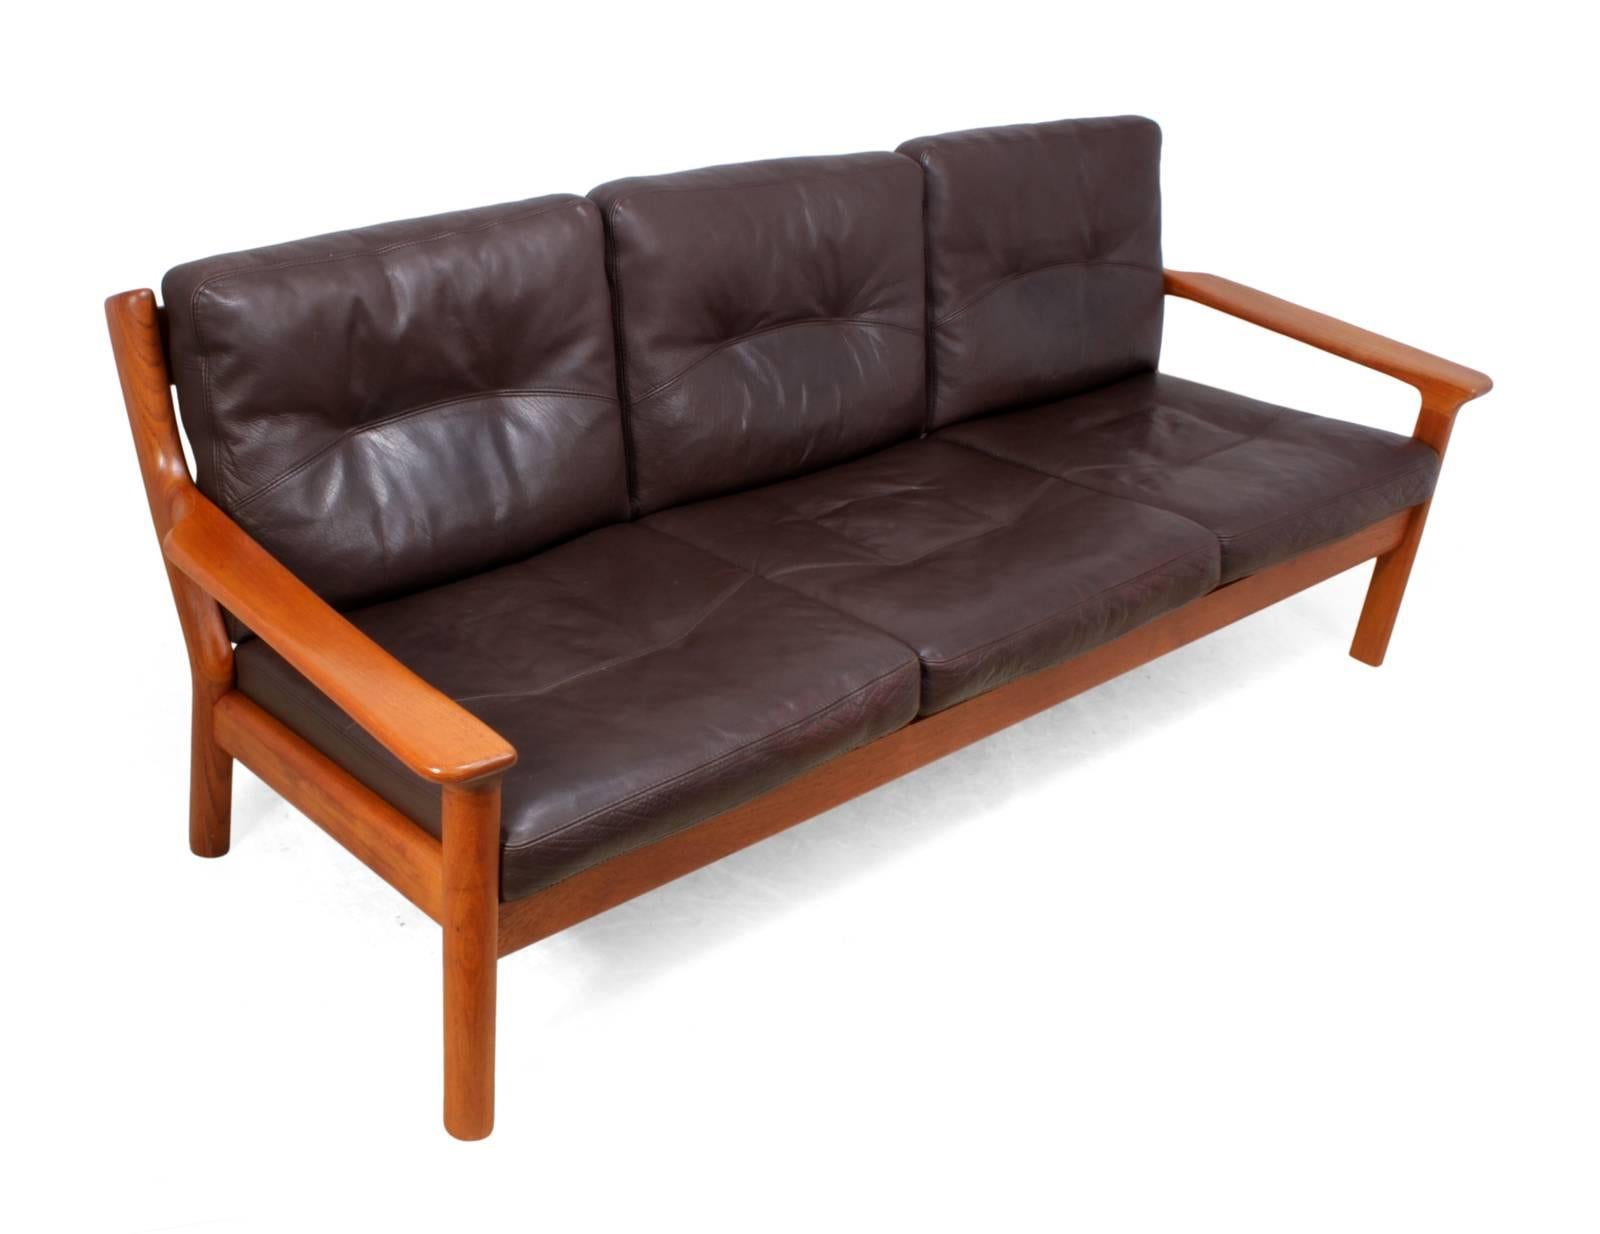 Midcentury Sofa in Teak and Leather by Glostrop 1